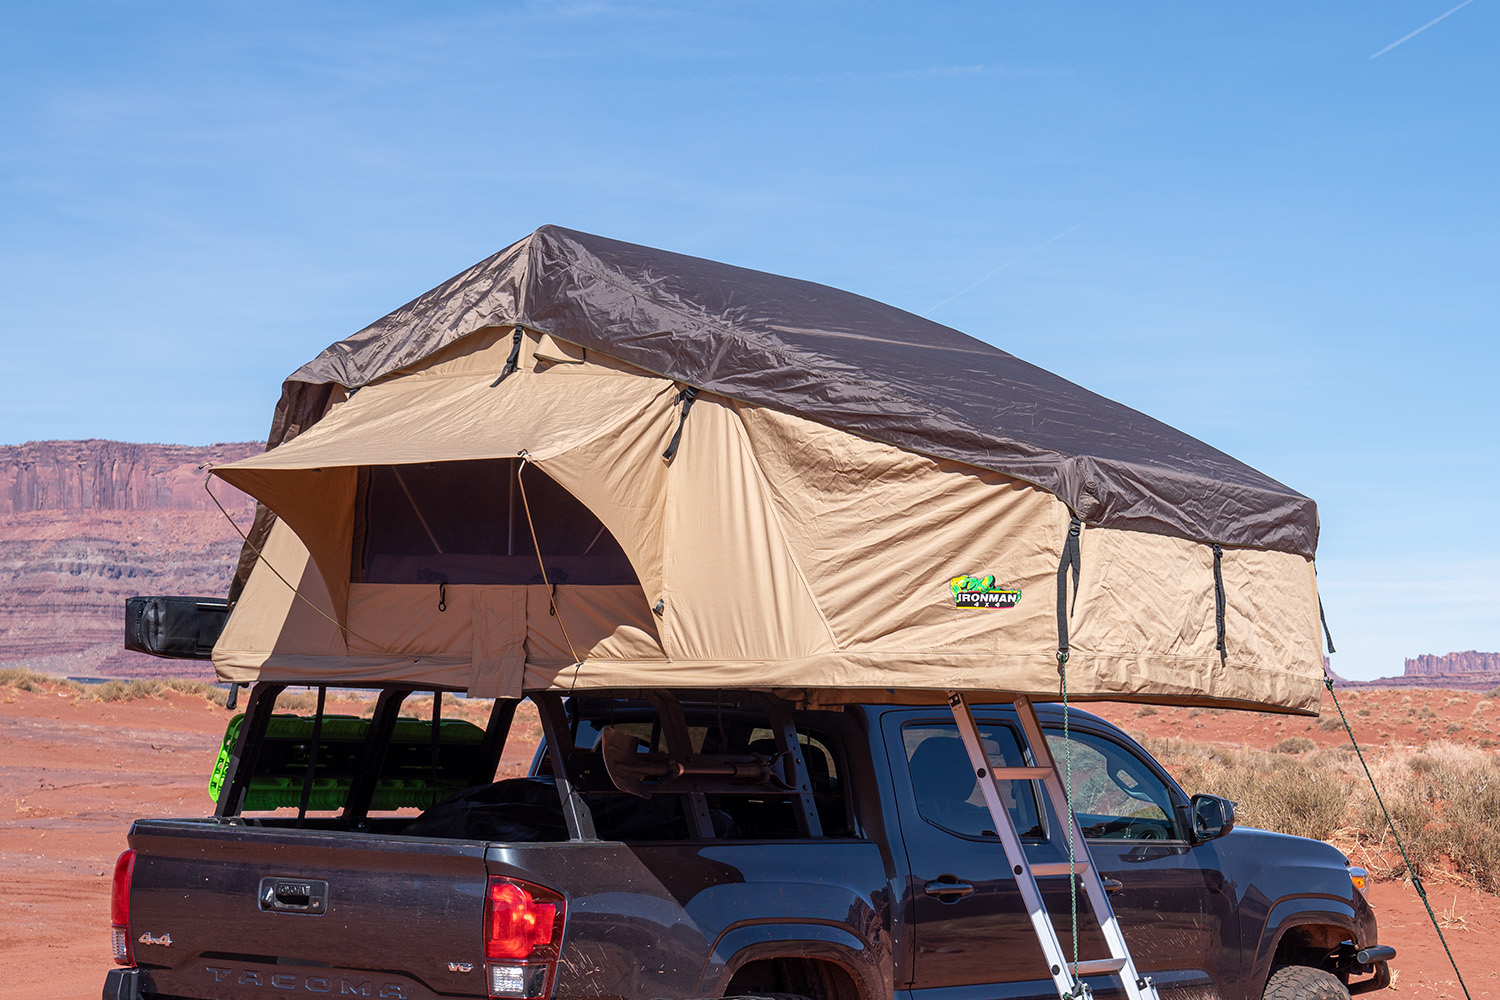 Would this tent work with the Subaru Crosstrek 2019?